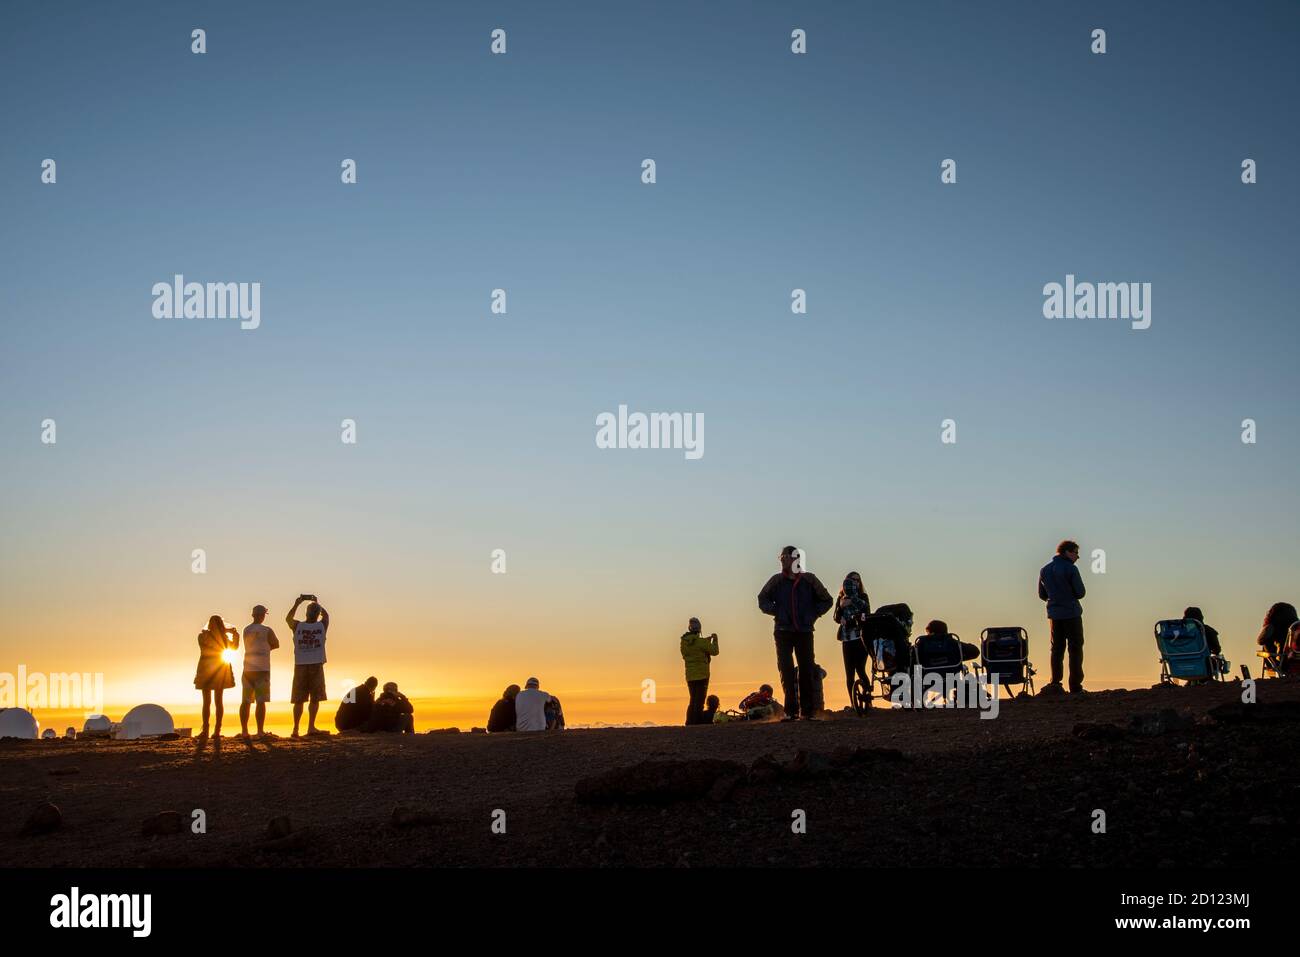 Maui, Hawaii.  Tourists on the Haleakala Crater in the Haleakala National Park watch the sunset while above the clouds. Stock Photo